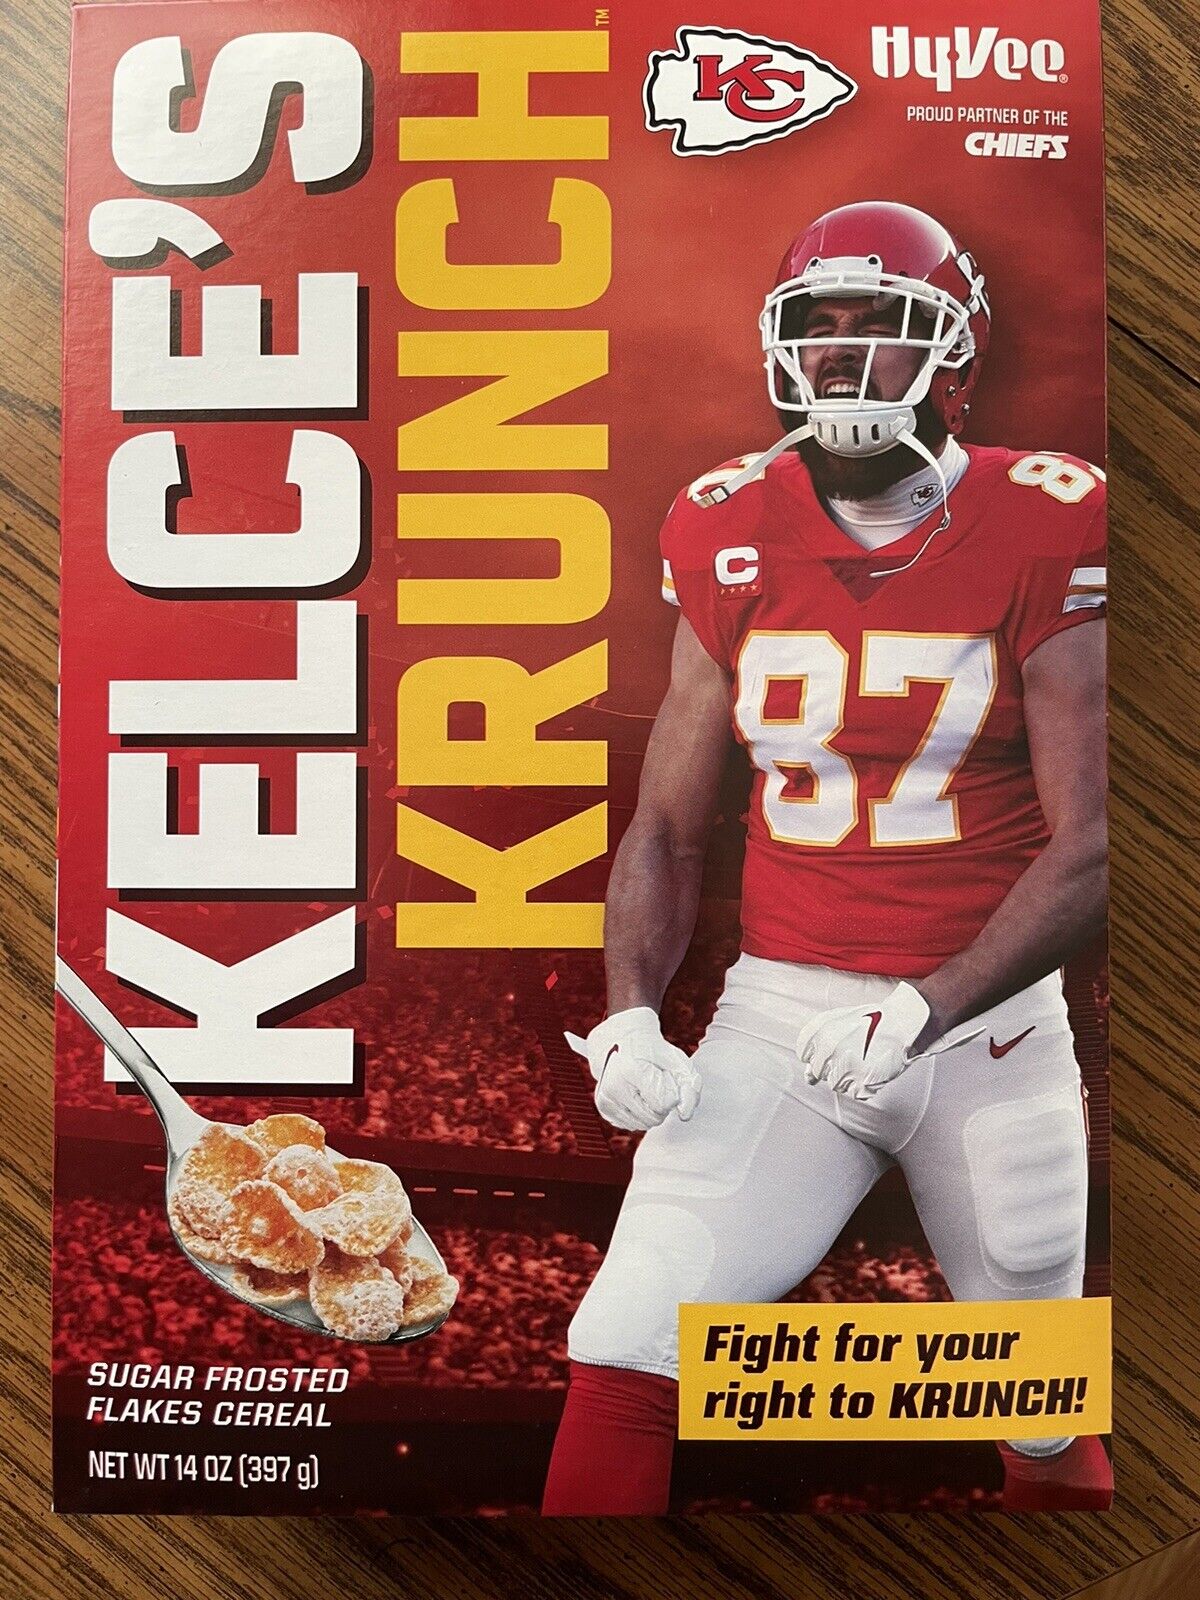 Travis Kelce’s Krunch Kansas City Chiefs Cereal Hy-Vee Sugar Frosted Flakes NFL